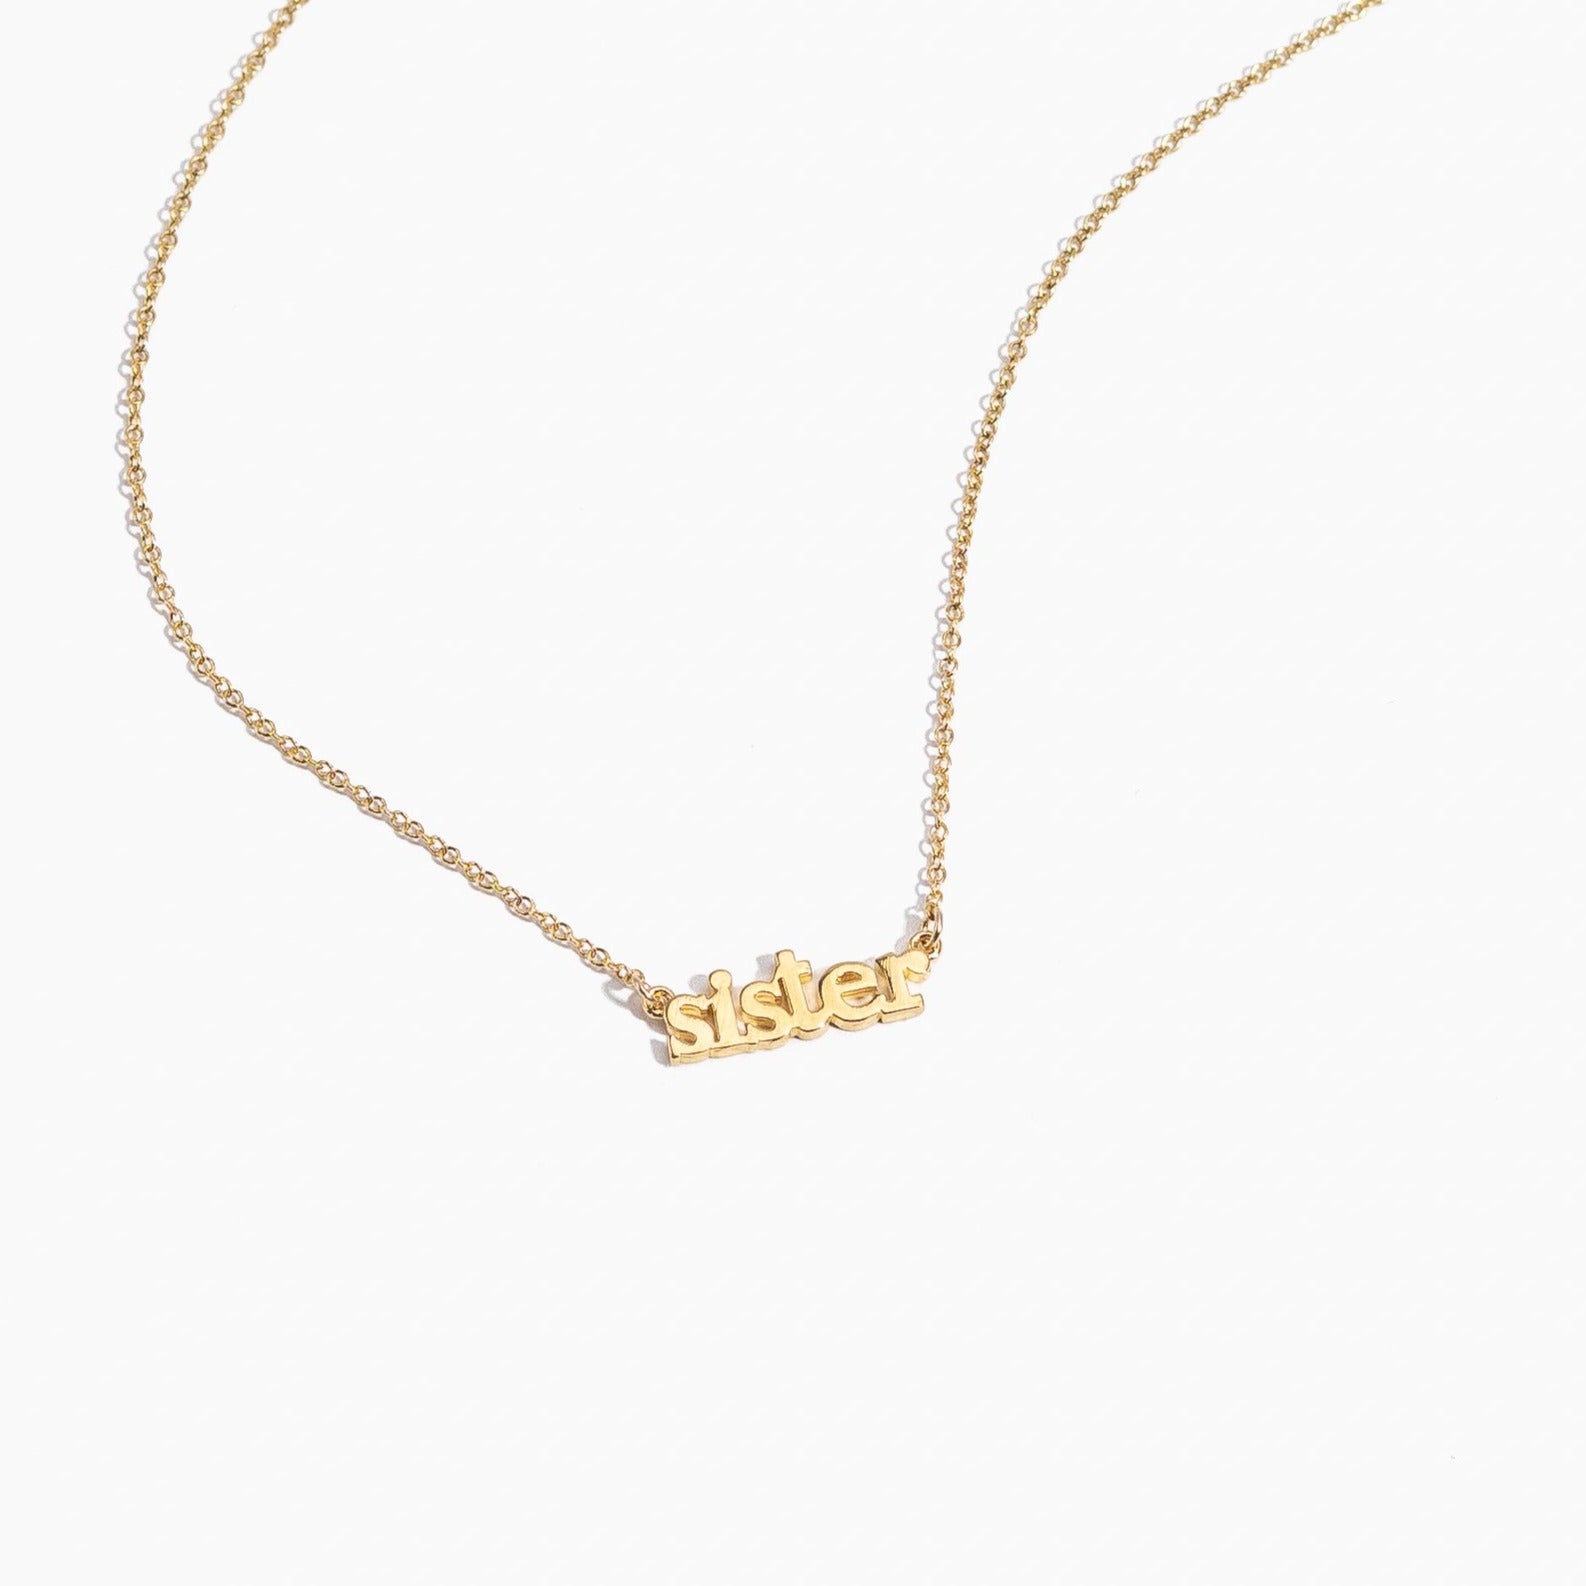 Gold Sister Necklace by Katie Dean Jewelry, made in America, perfect for the dainty minimal jewelry lovers 